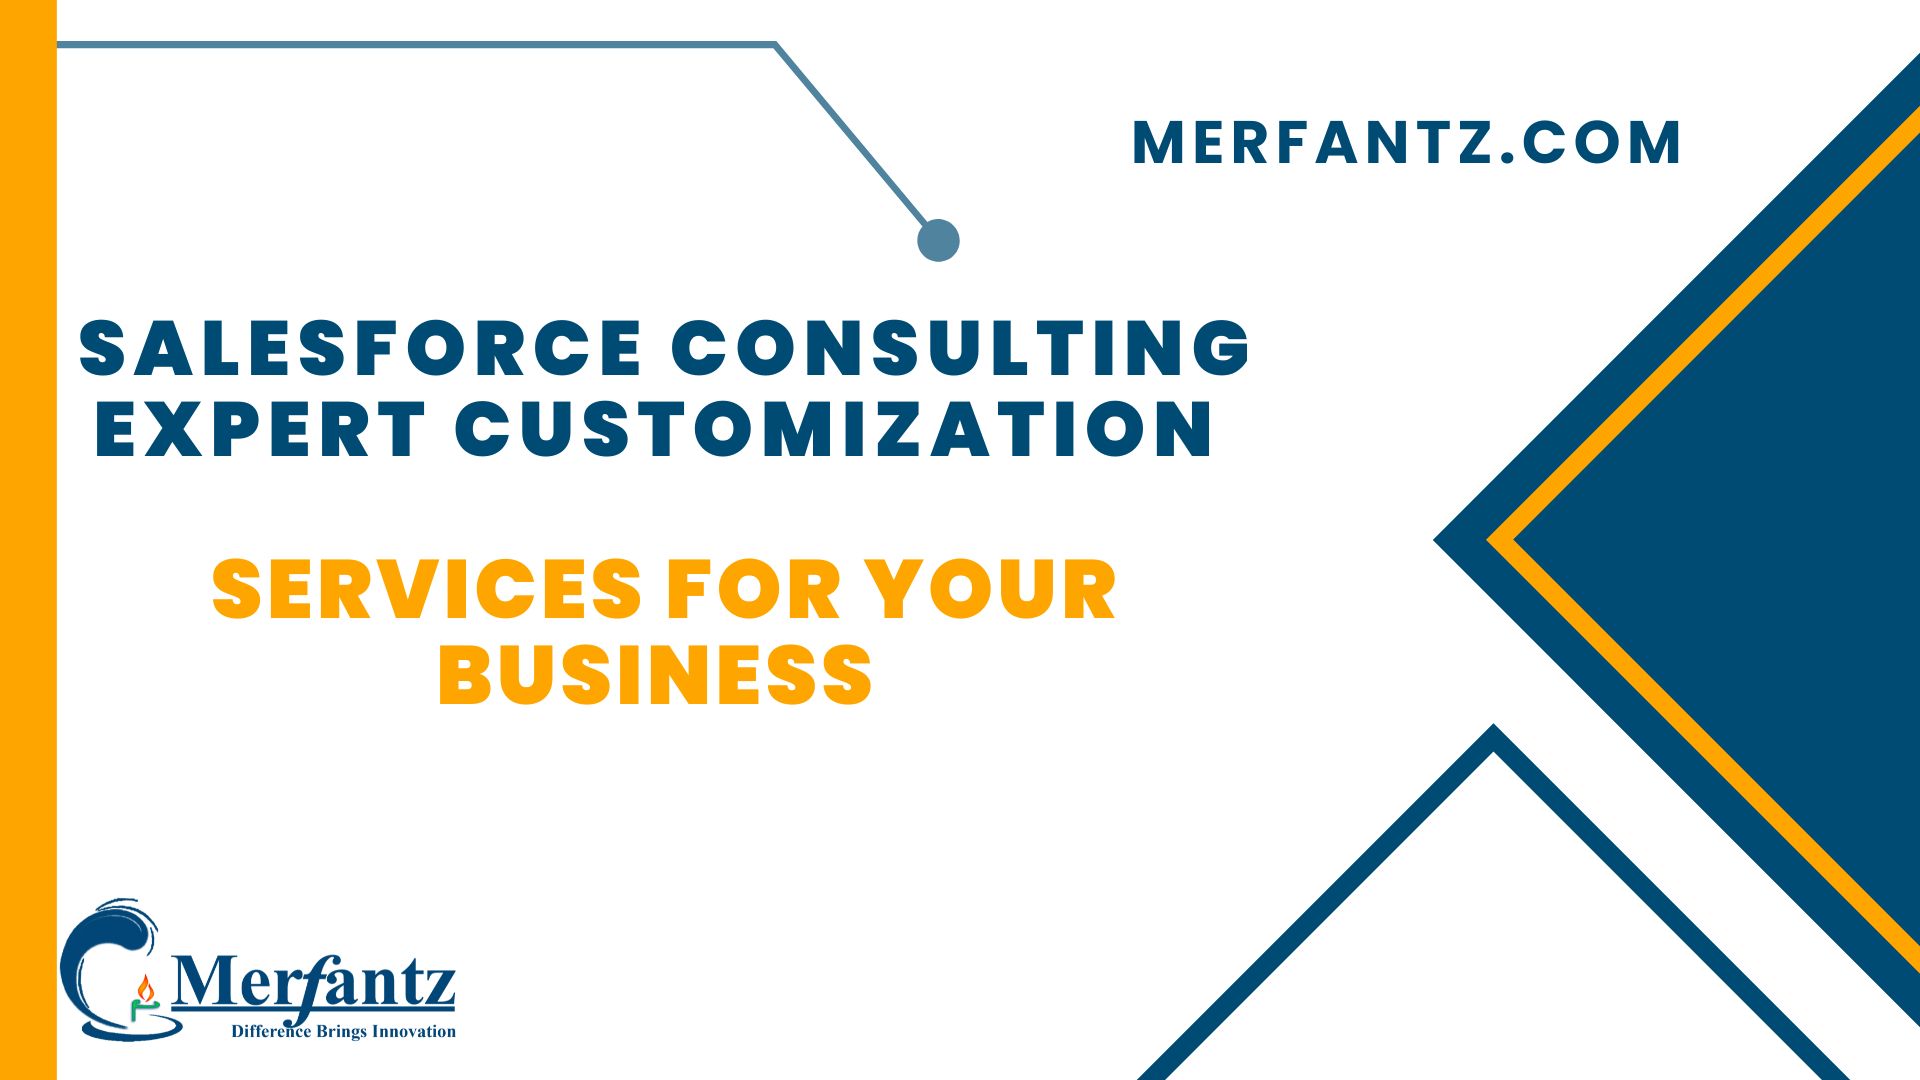 Salesforce Consulting - Expert Customization Services for Your Business